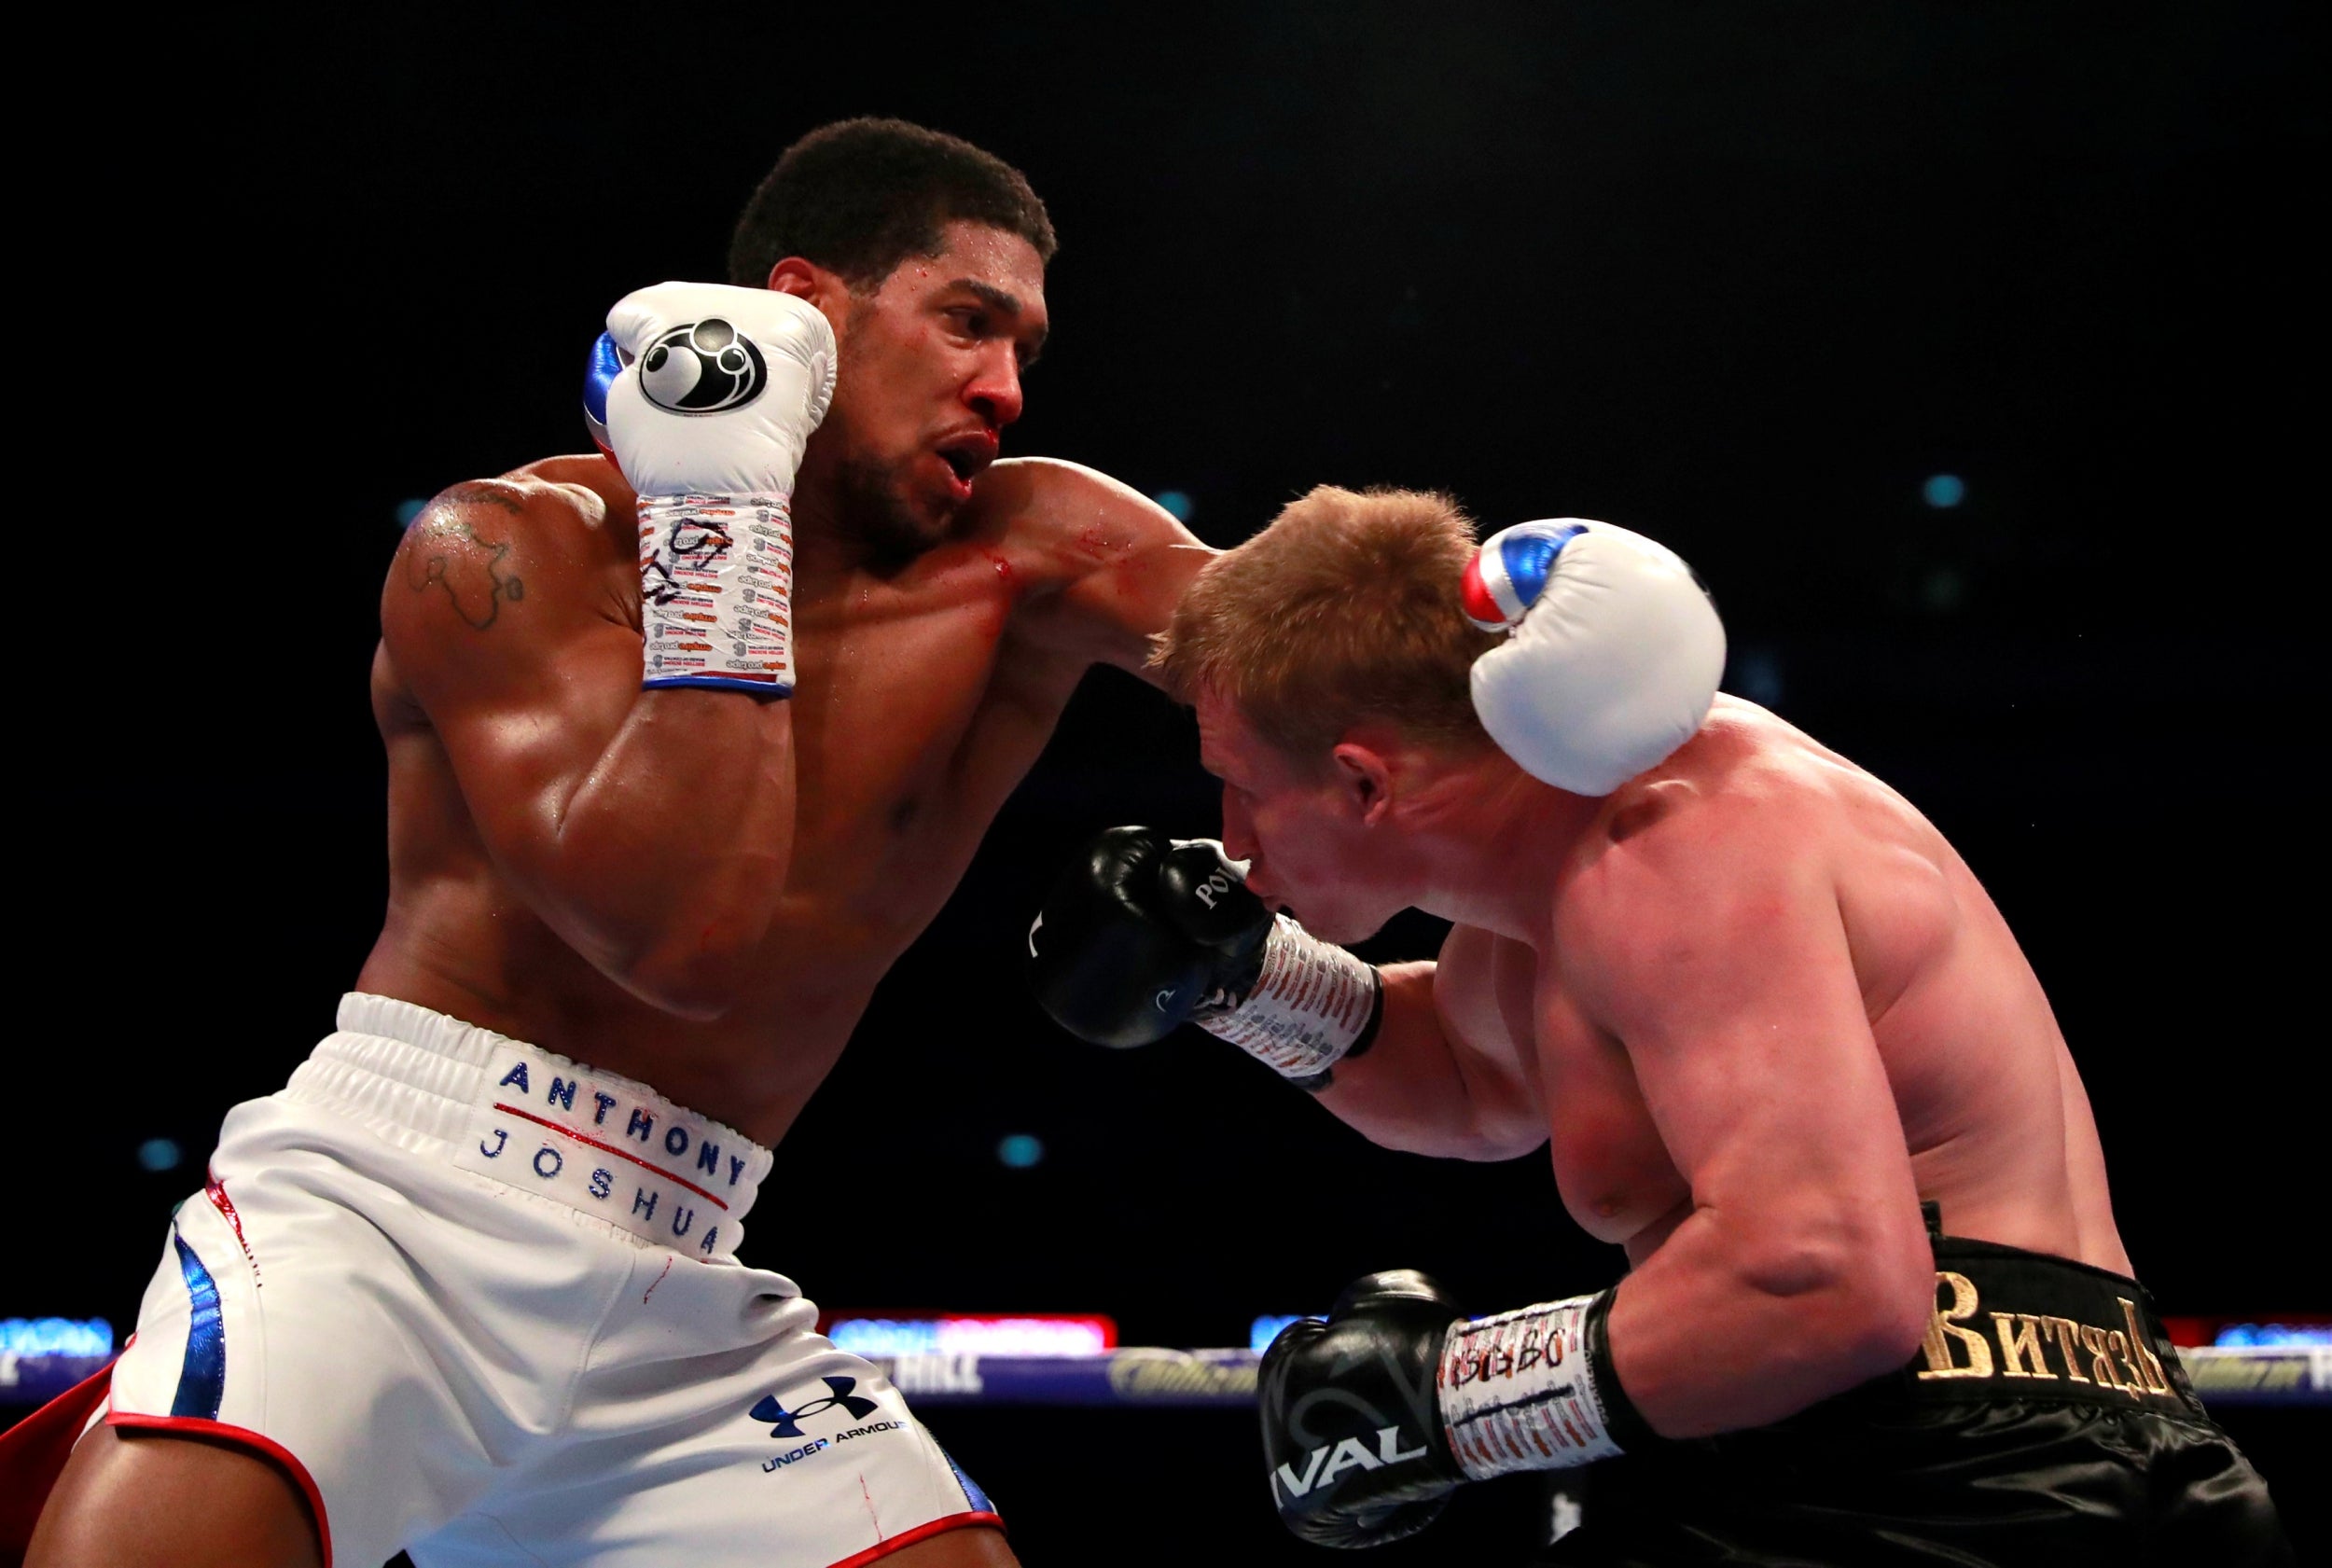 Anthony Joshua knocked out Alexander Povetkin in the seventh round